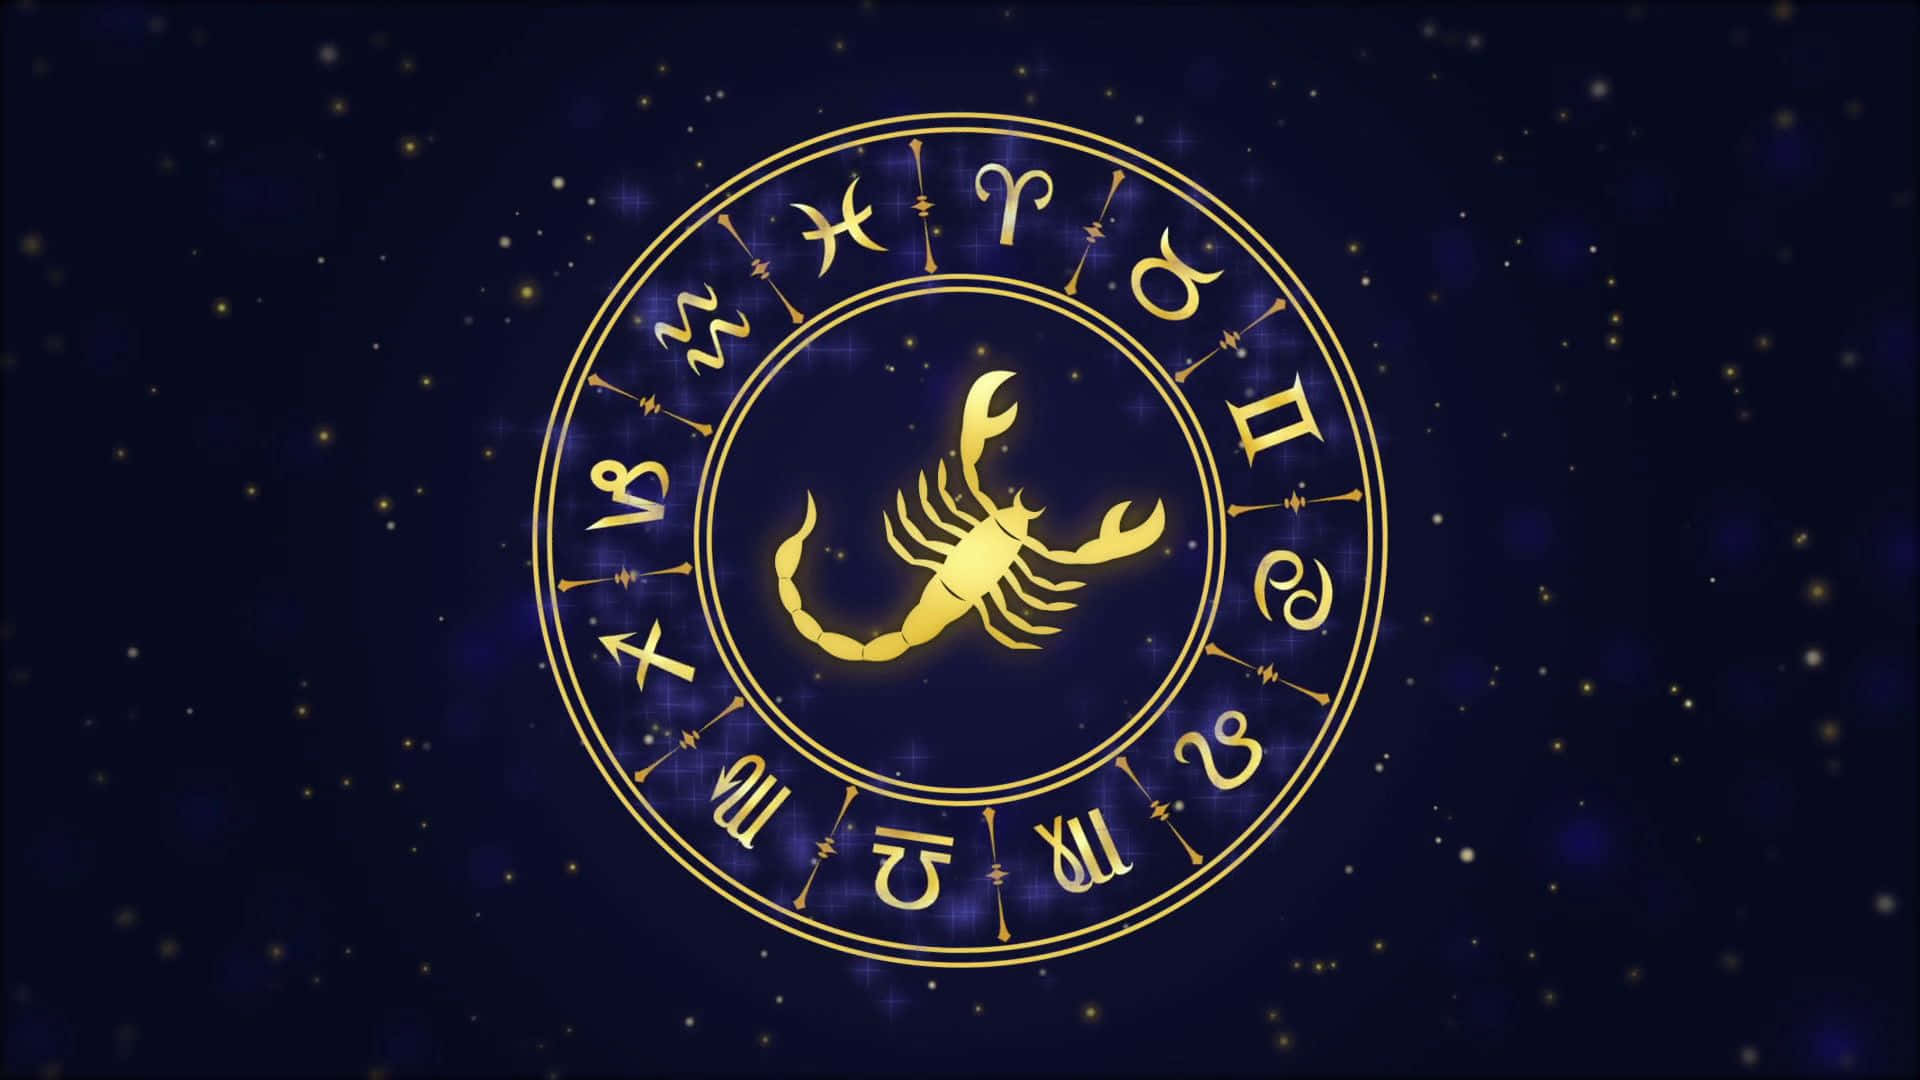 Astrological Signs amidst the Galaxy